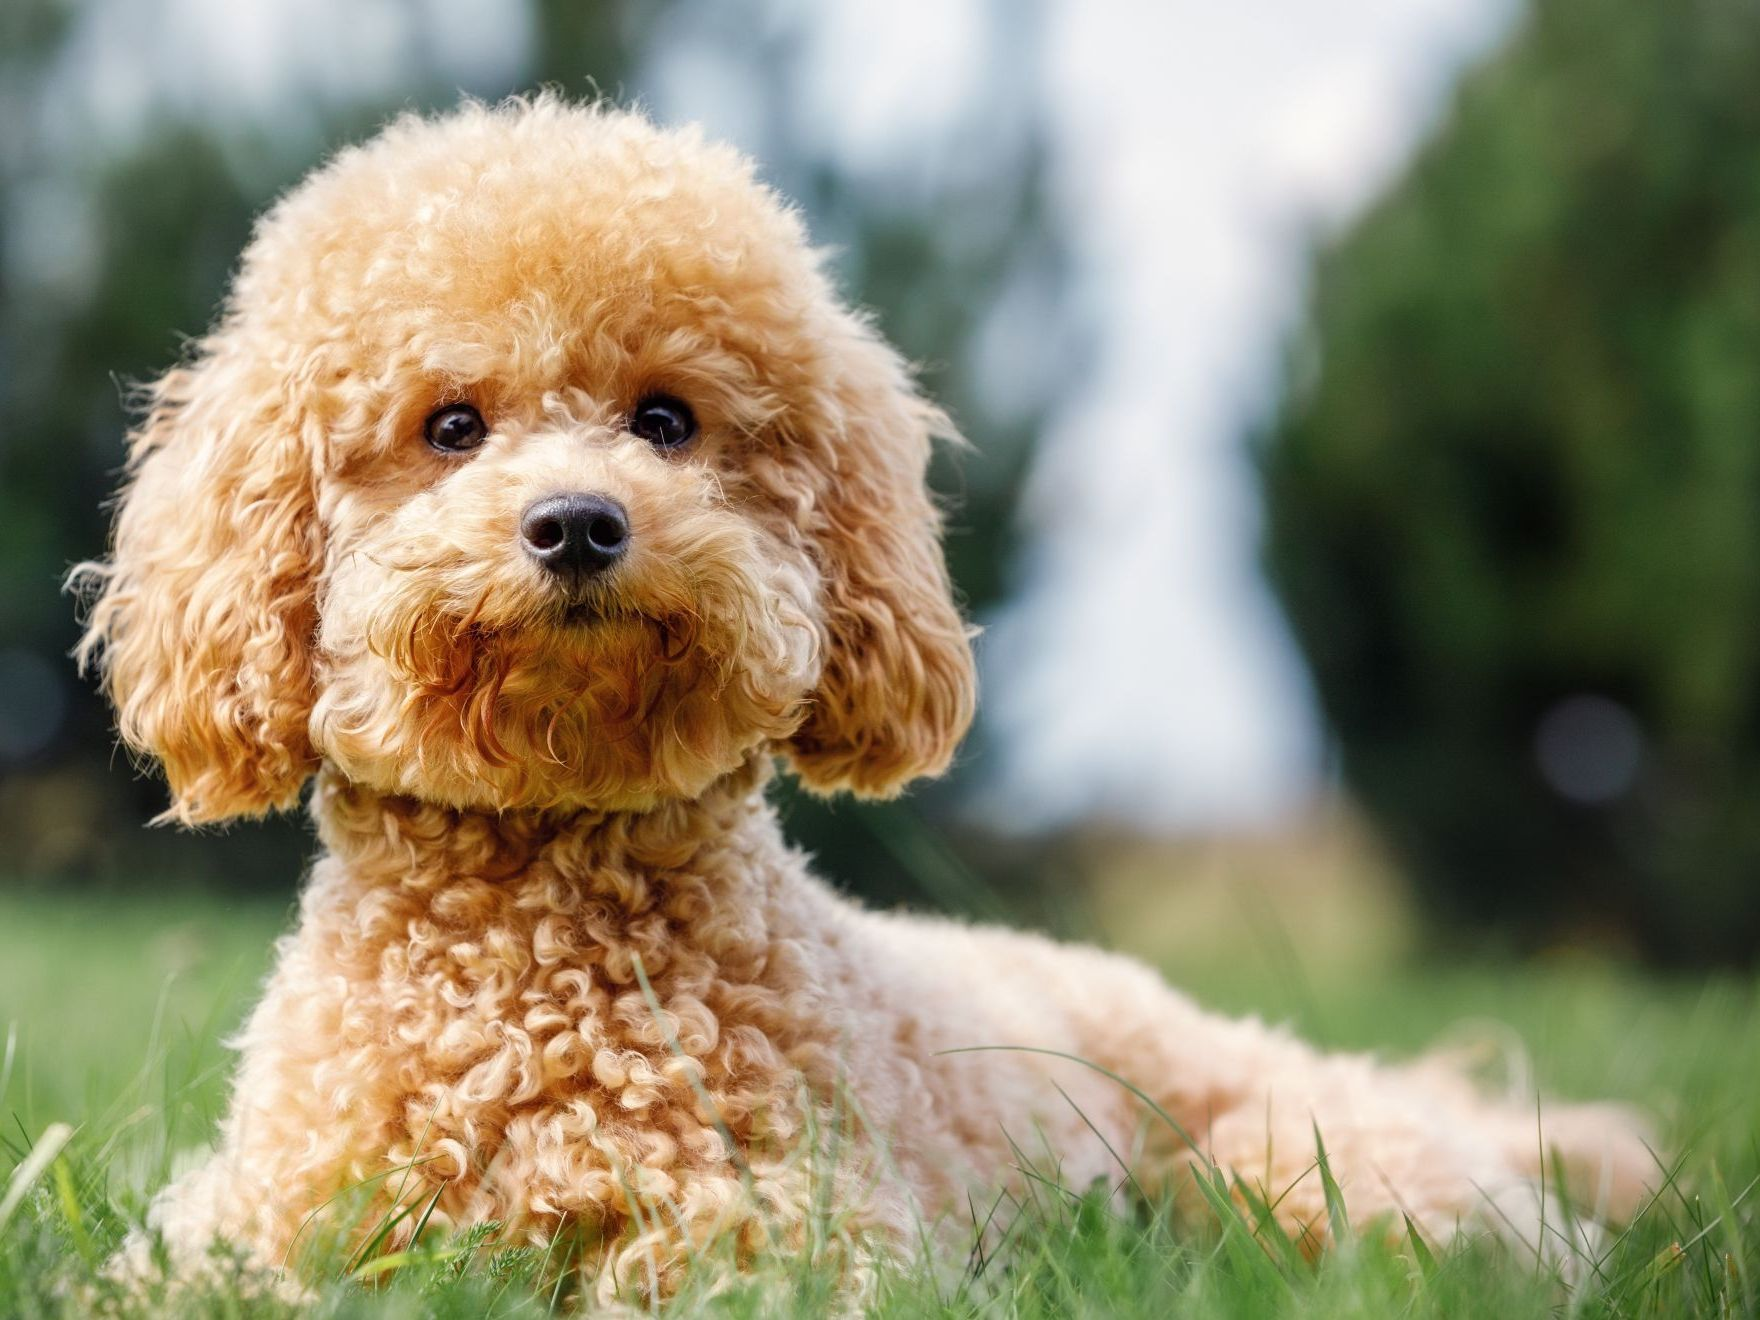 poodle-on-grass-dog-nature-breed